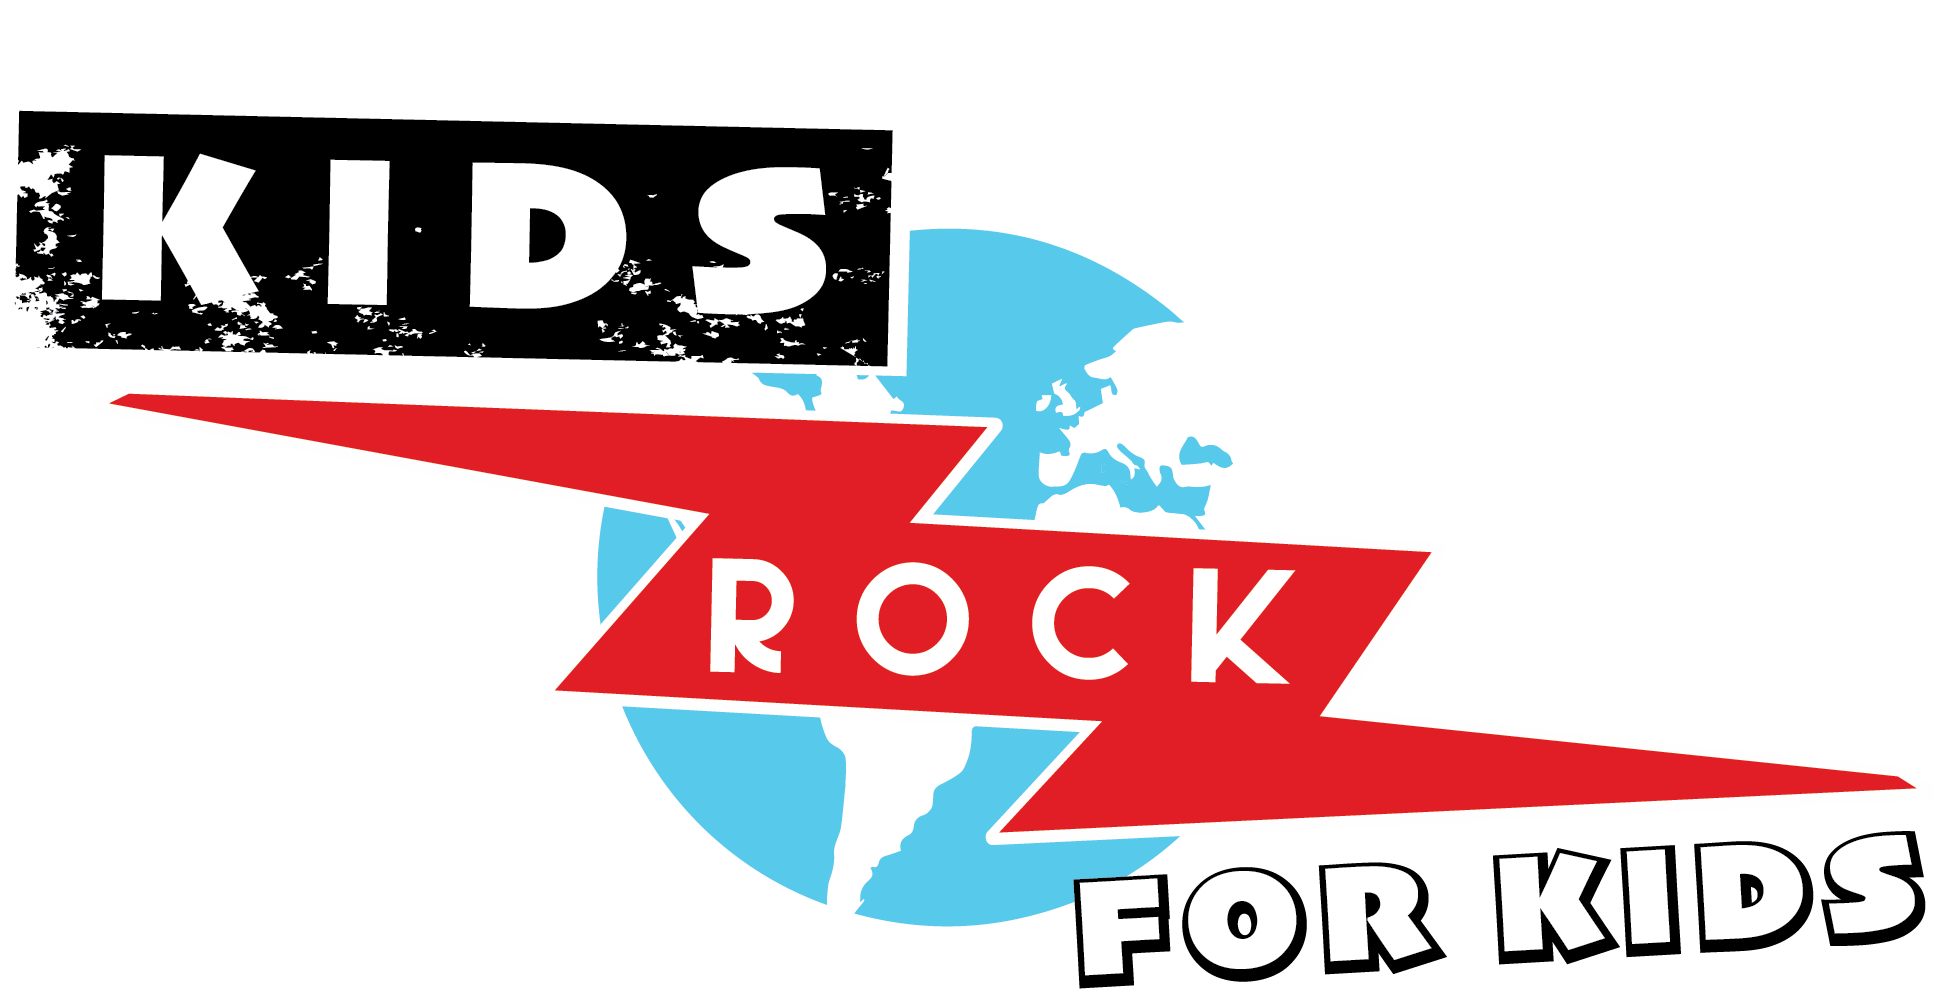 KIDS ROCK FOR KIDS TO STREAM LIVE CONCERT FEATURING 20+ INTERNATIONAL YOUTH BANDS